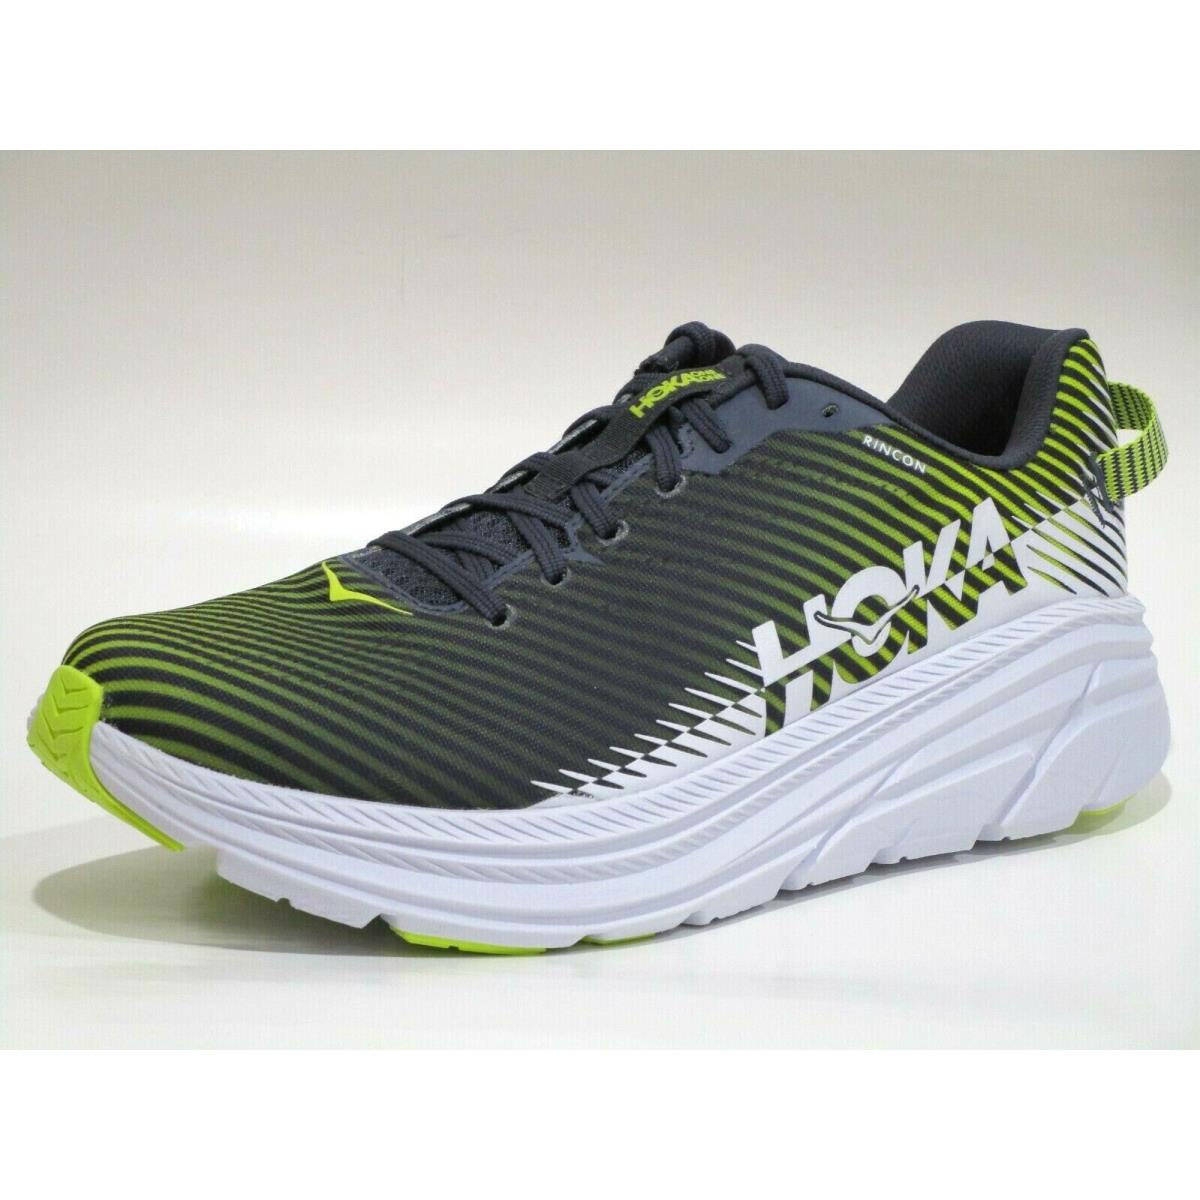 Hoka One One Men`s Rincon 2 Road Running Sneaker Shoes Size 12 D M US